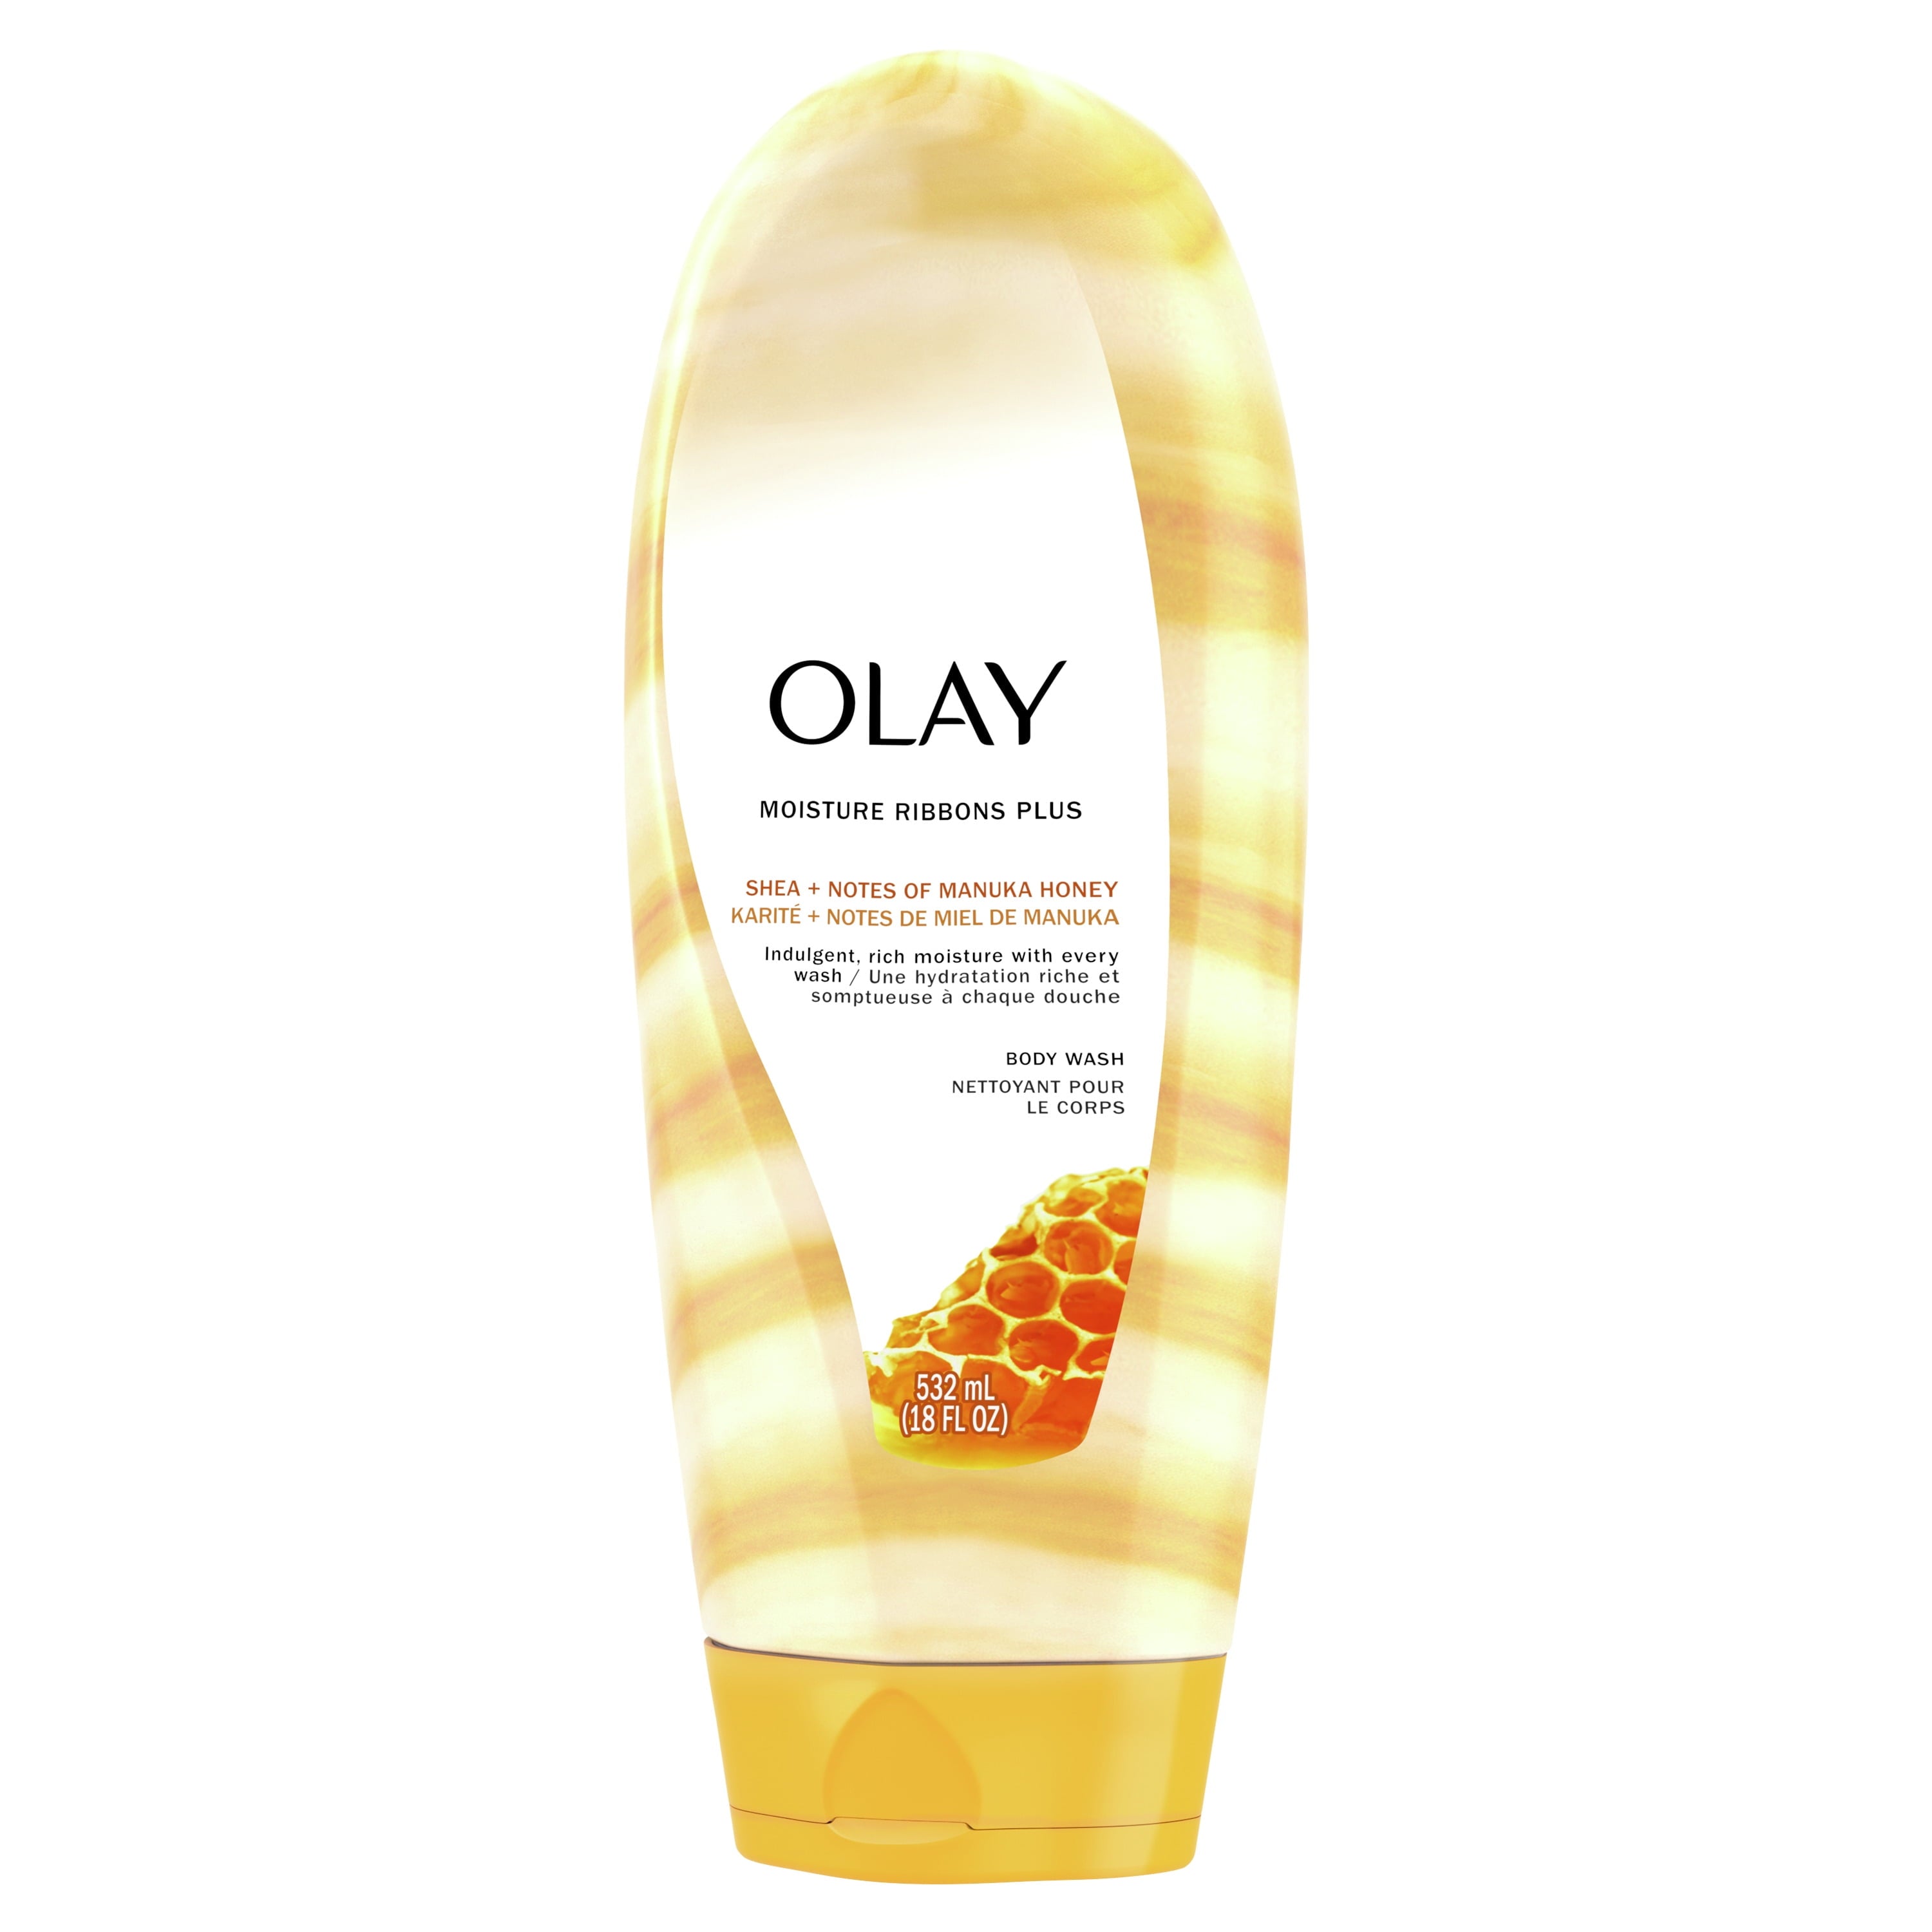 Wholesale prices with free shipping all over United States Olay Moisture Ribbons Plus Shea and Manuka Honey Body Wash, 18 fl oz - Steven Deals